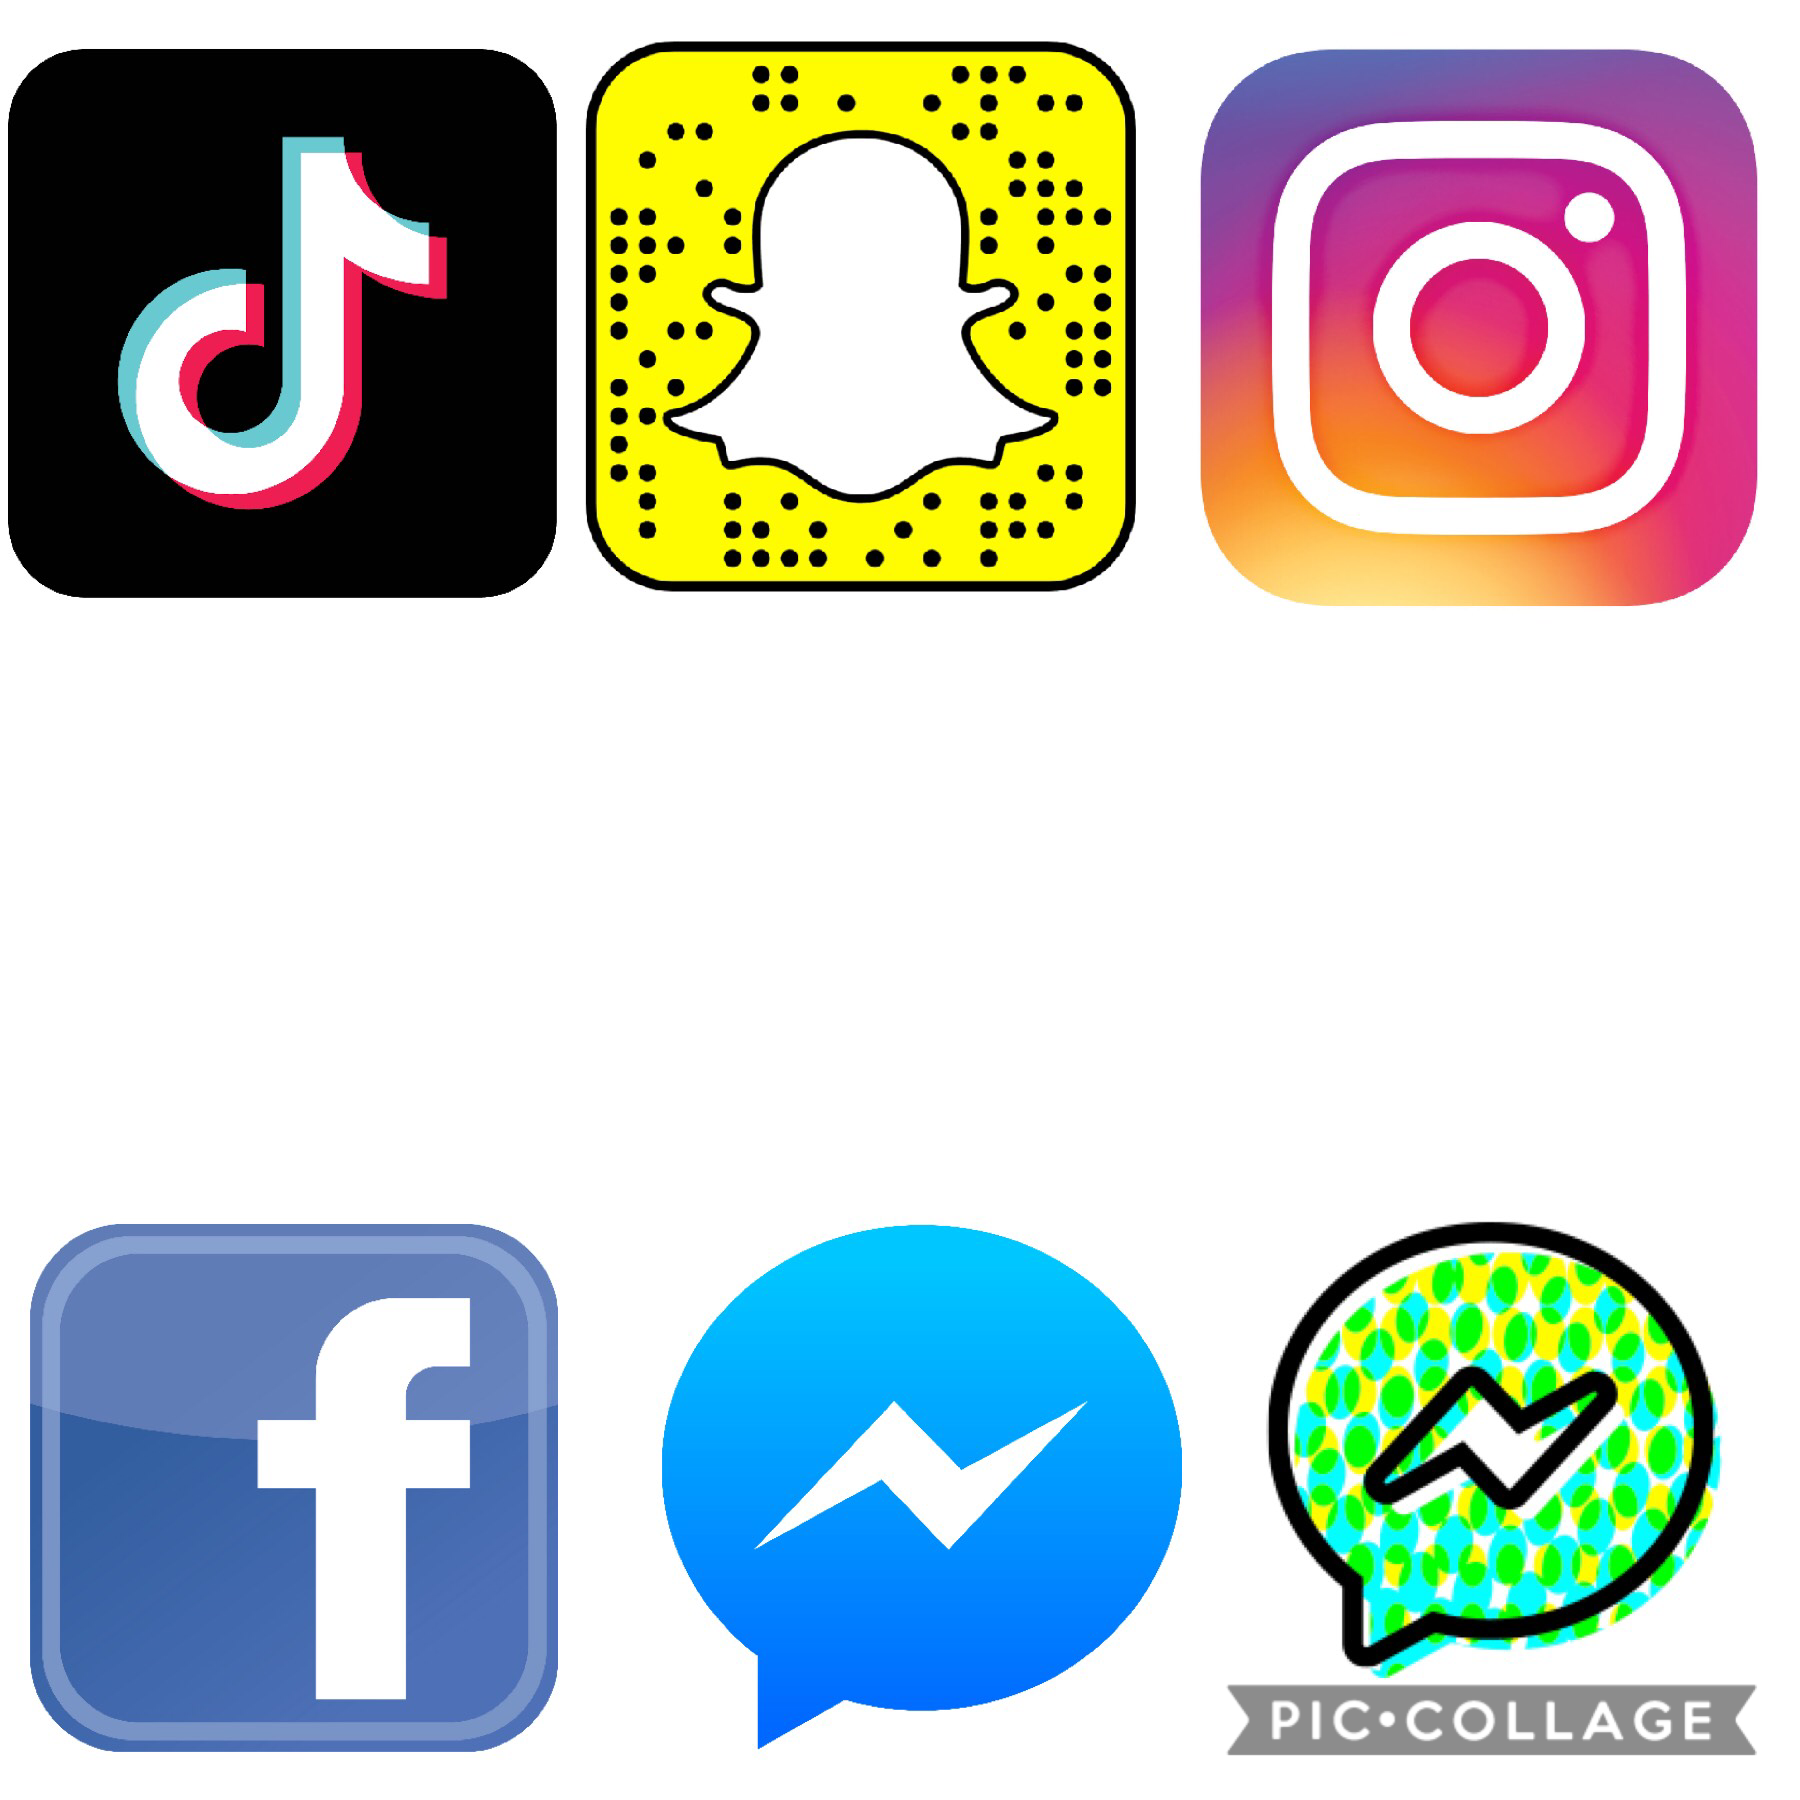 What app do you like do you like TikTok or Snapchat or Instagram or Facebook or Messenger or Kids message 